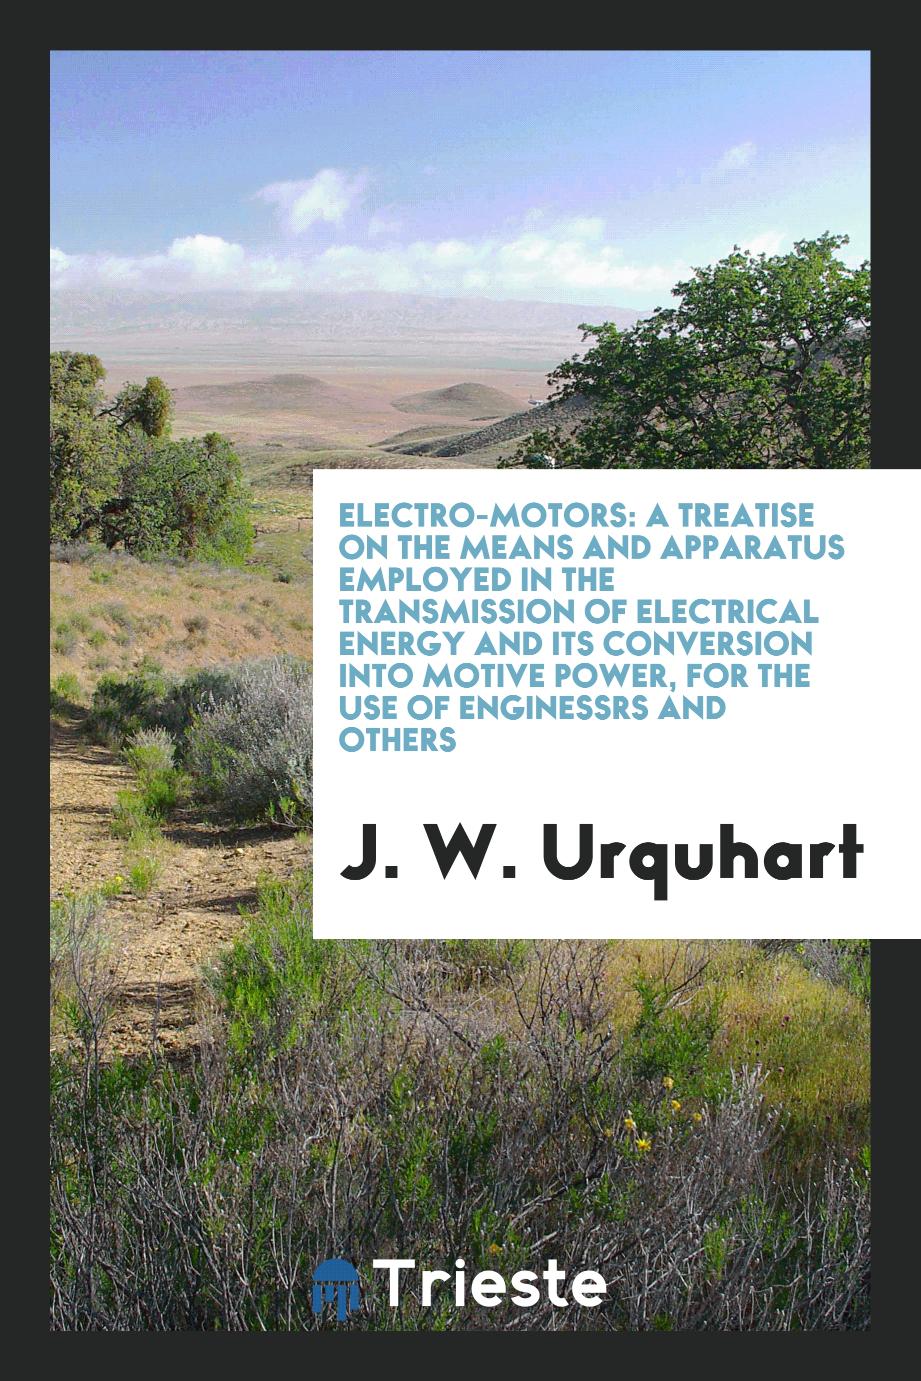 J. W. Urquhart - Electro-Motors: A Treatise on the Means and Apparatus Employed in the Transmission of Electrical Energy and Its Conversion into Motive Power, for the Use of Enginessrs and Others